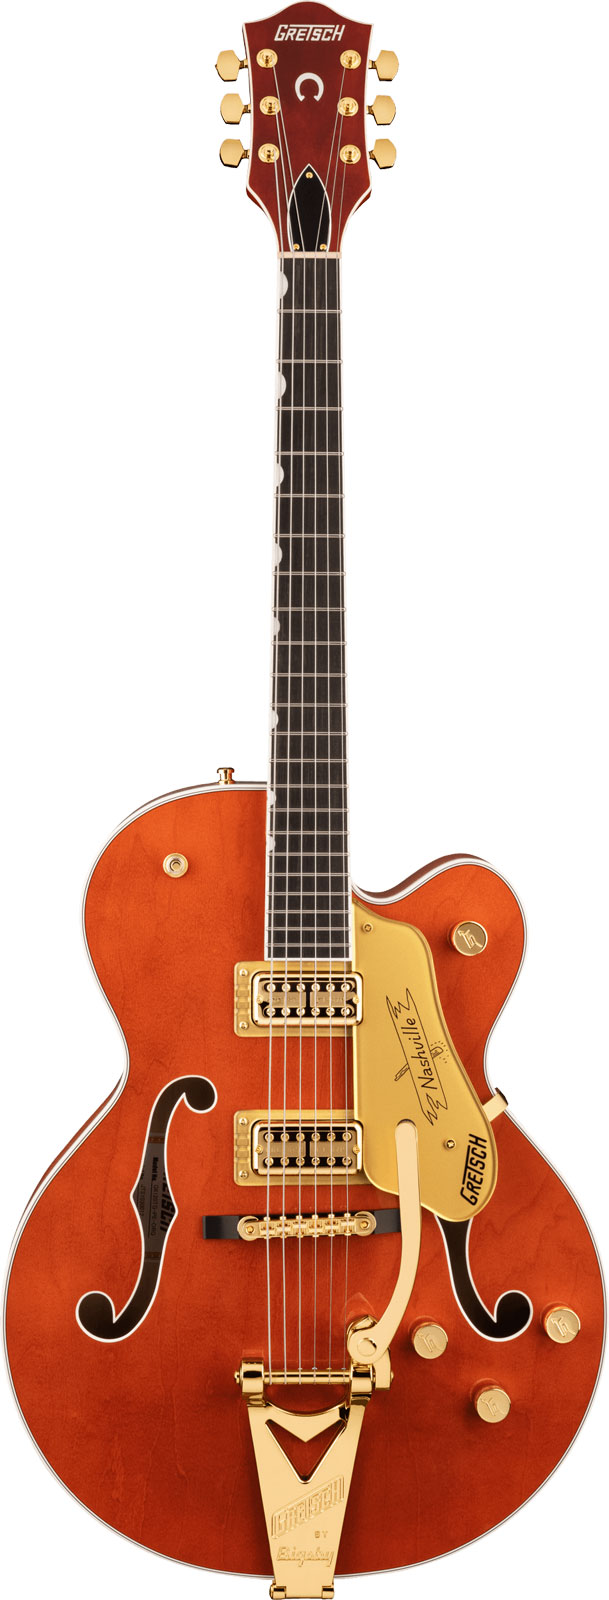 GRETSCH GUITARS G6120TG PLAYERS EDITION NASHVILLE HOLLOW BODY WITH STRING-THRU BIGSBY AND GOLD HARDWARE EBO, ORANGE